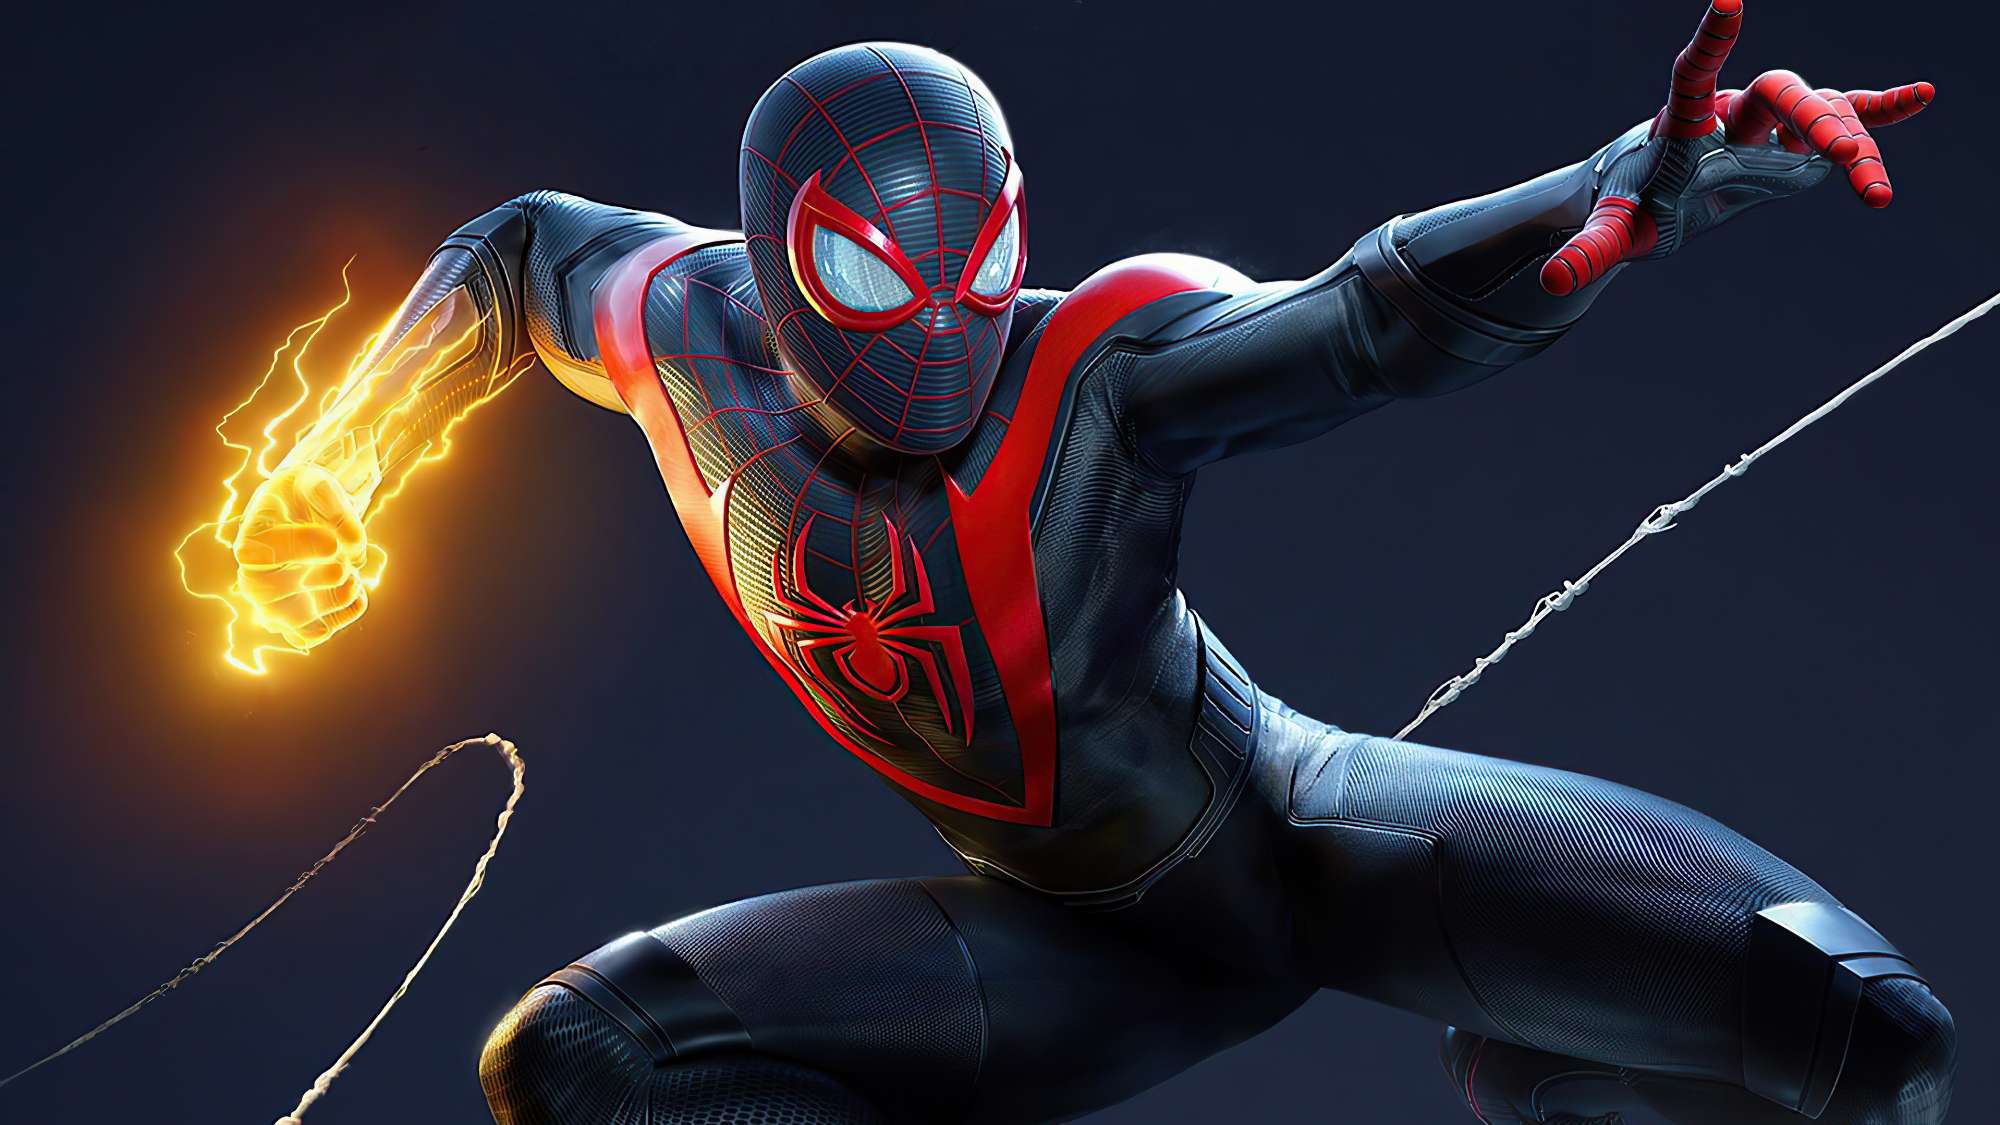 Sony is producing live action movie for Spider-Man Miles Morales